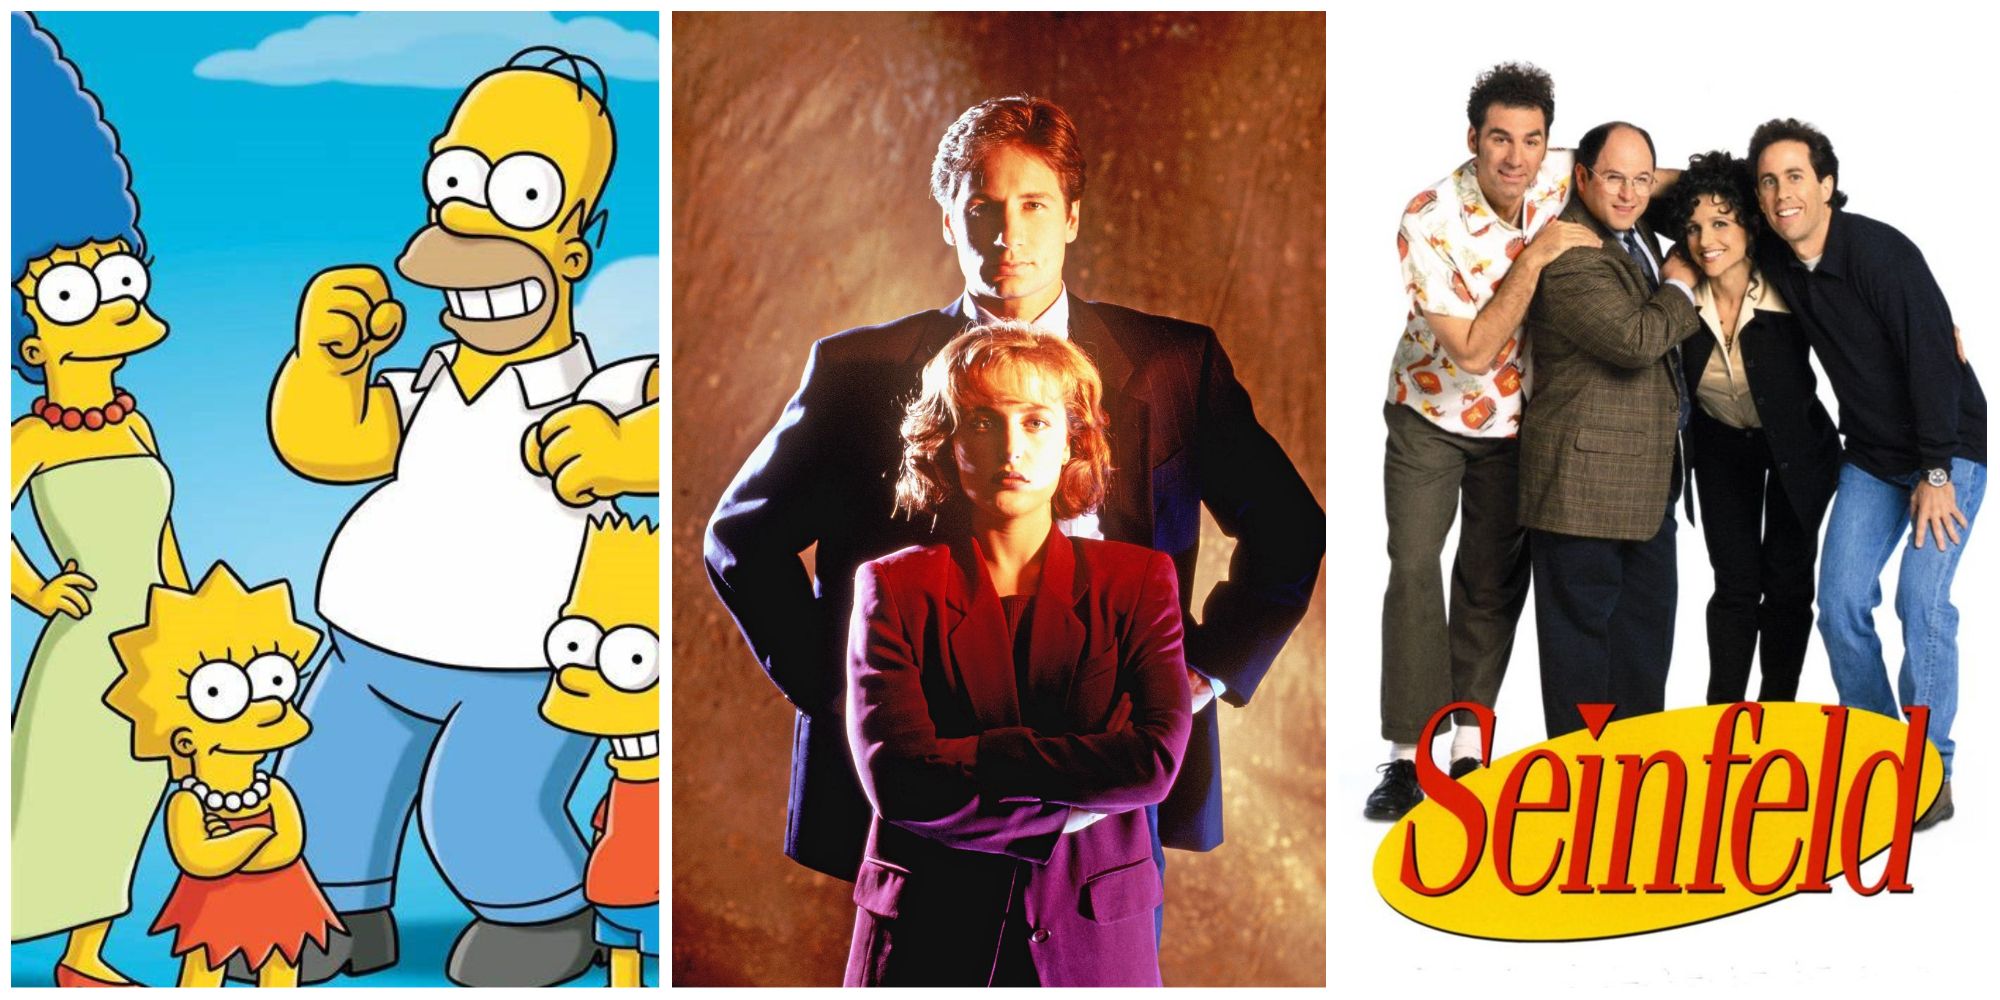 10 1990s TV Shows, split image of the Simpsons, X-Files, and the Seinfeld cast